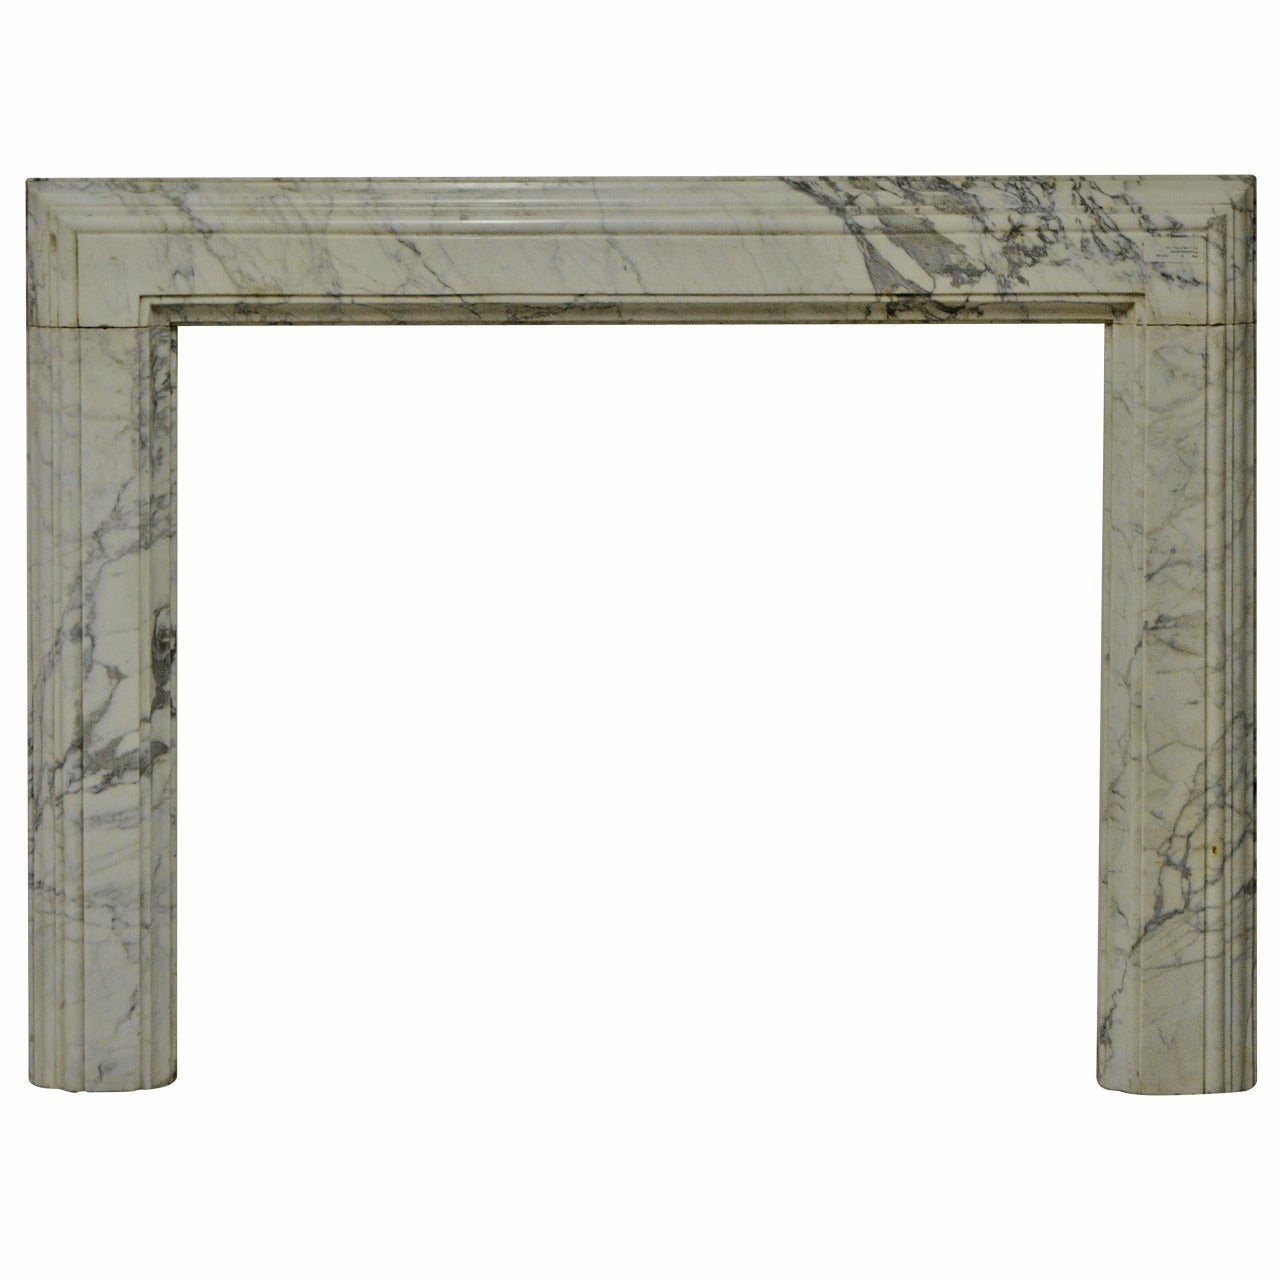 19th Century White Marble Bolection Fireplace Mantel